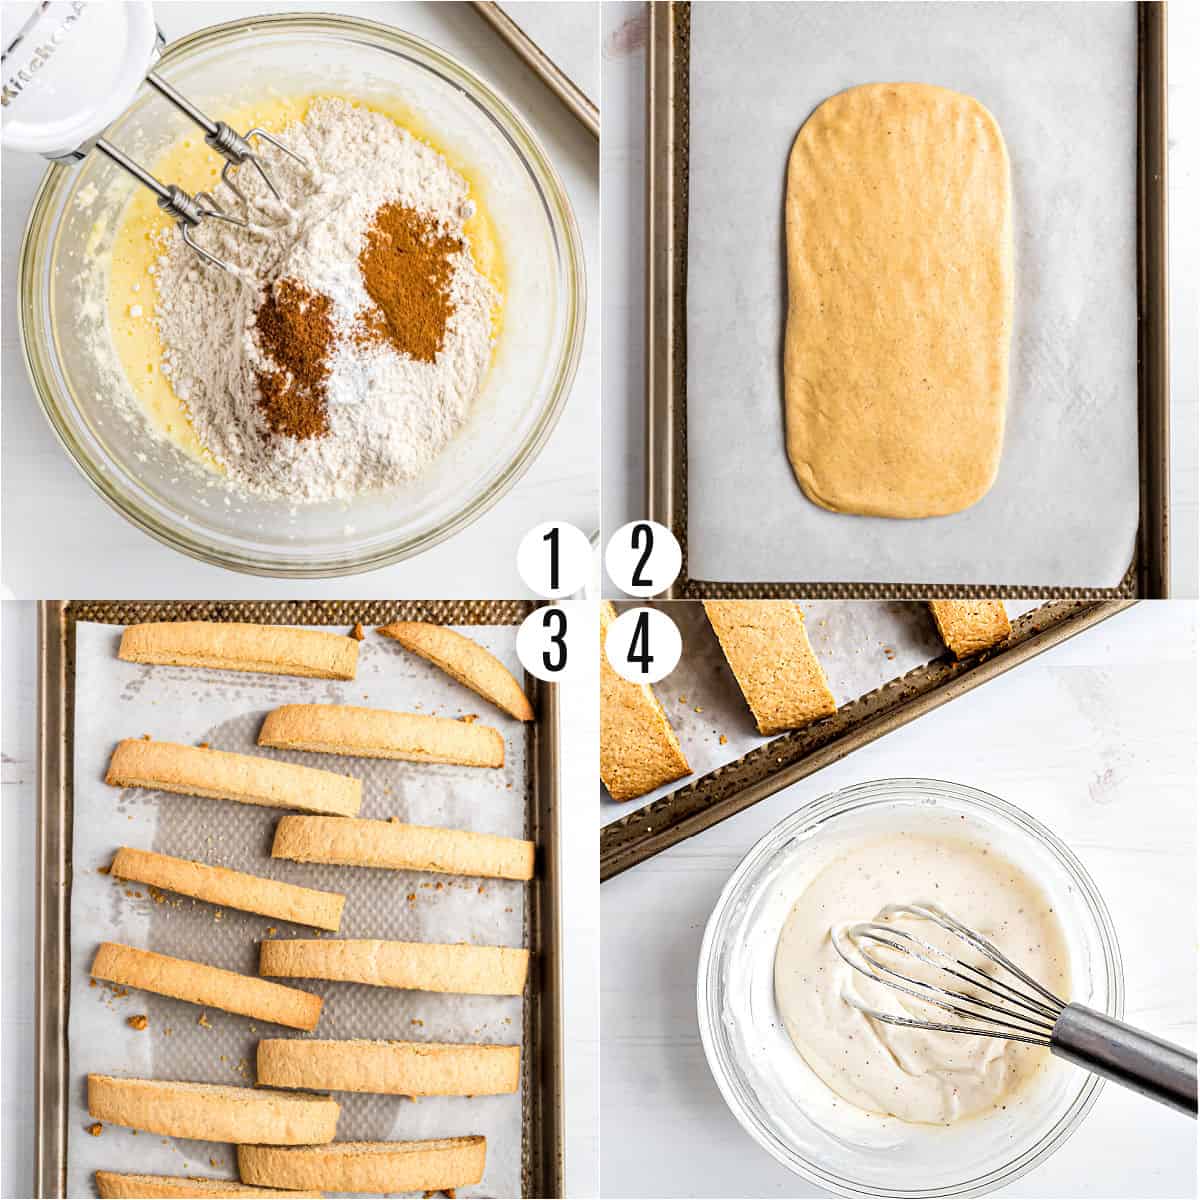 Step by step photos showing how to make eggnog biscotti.